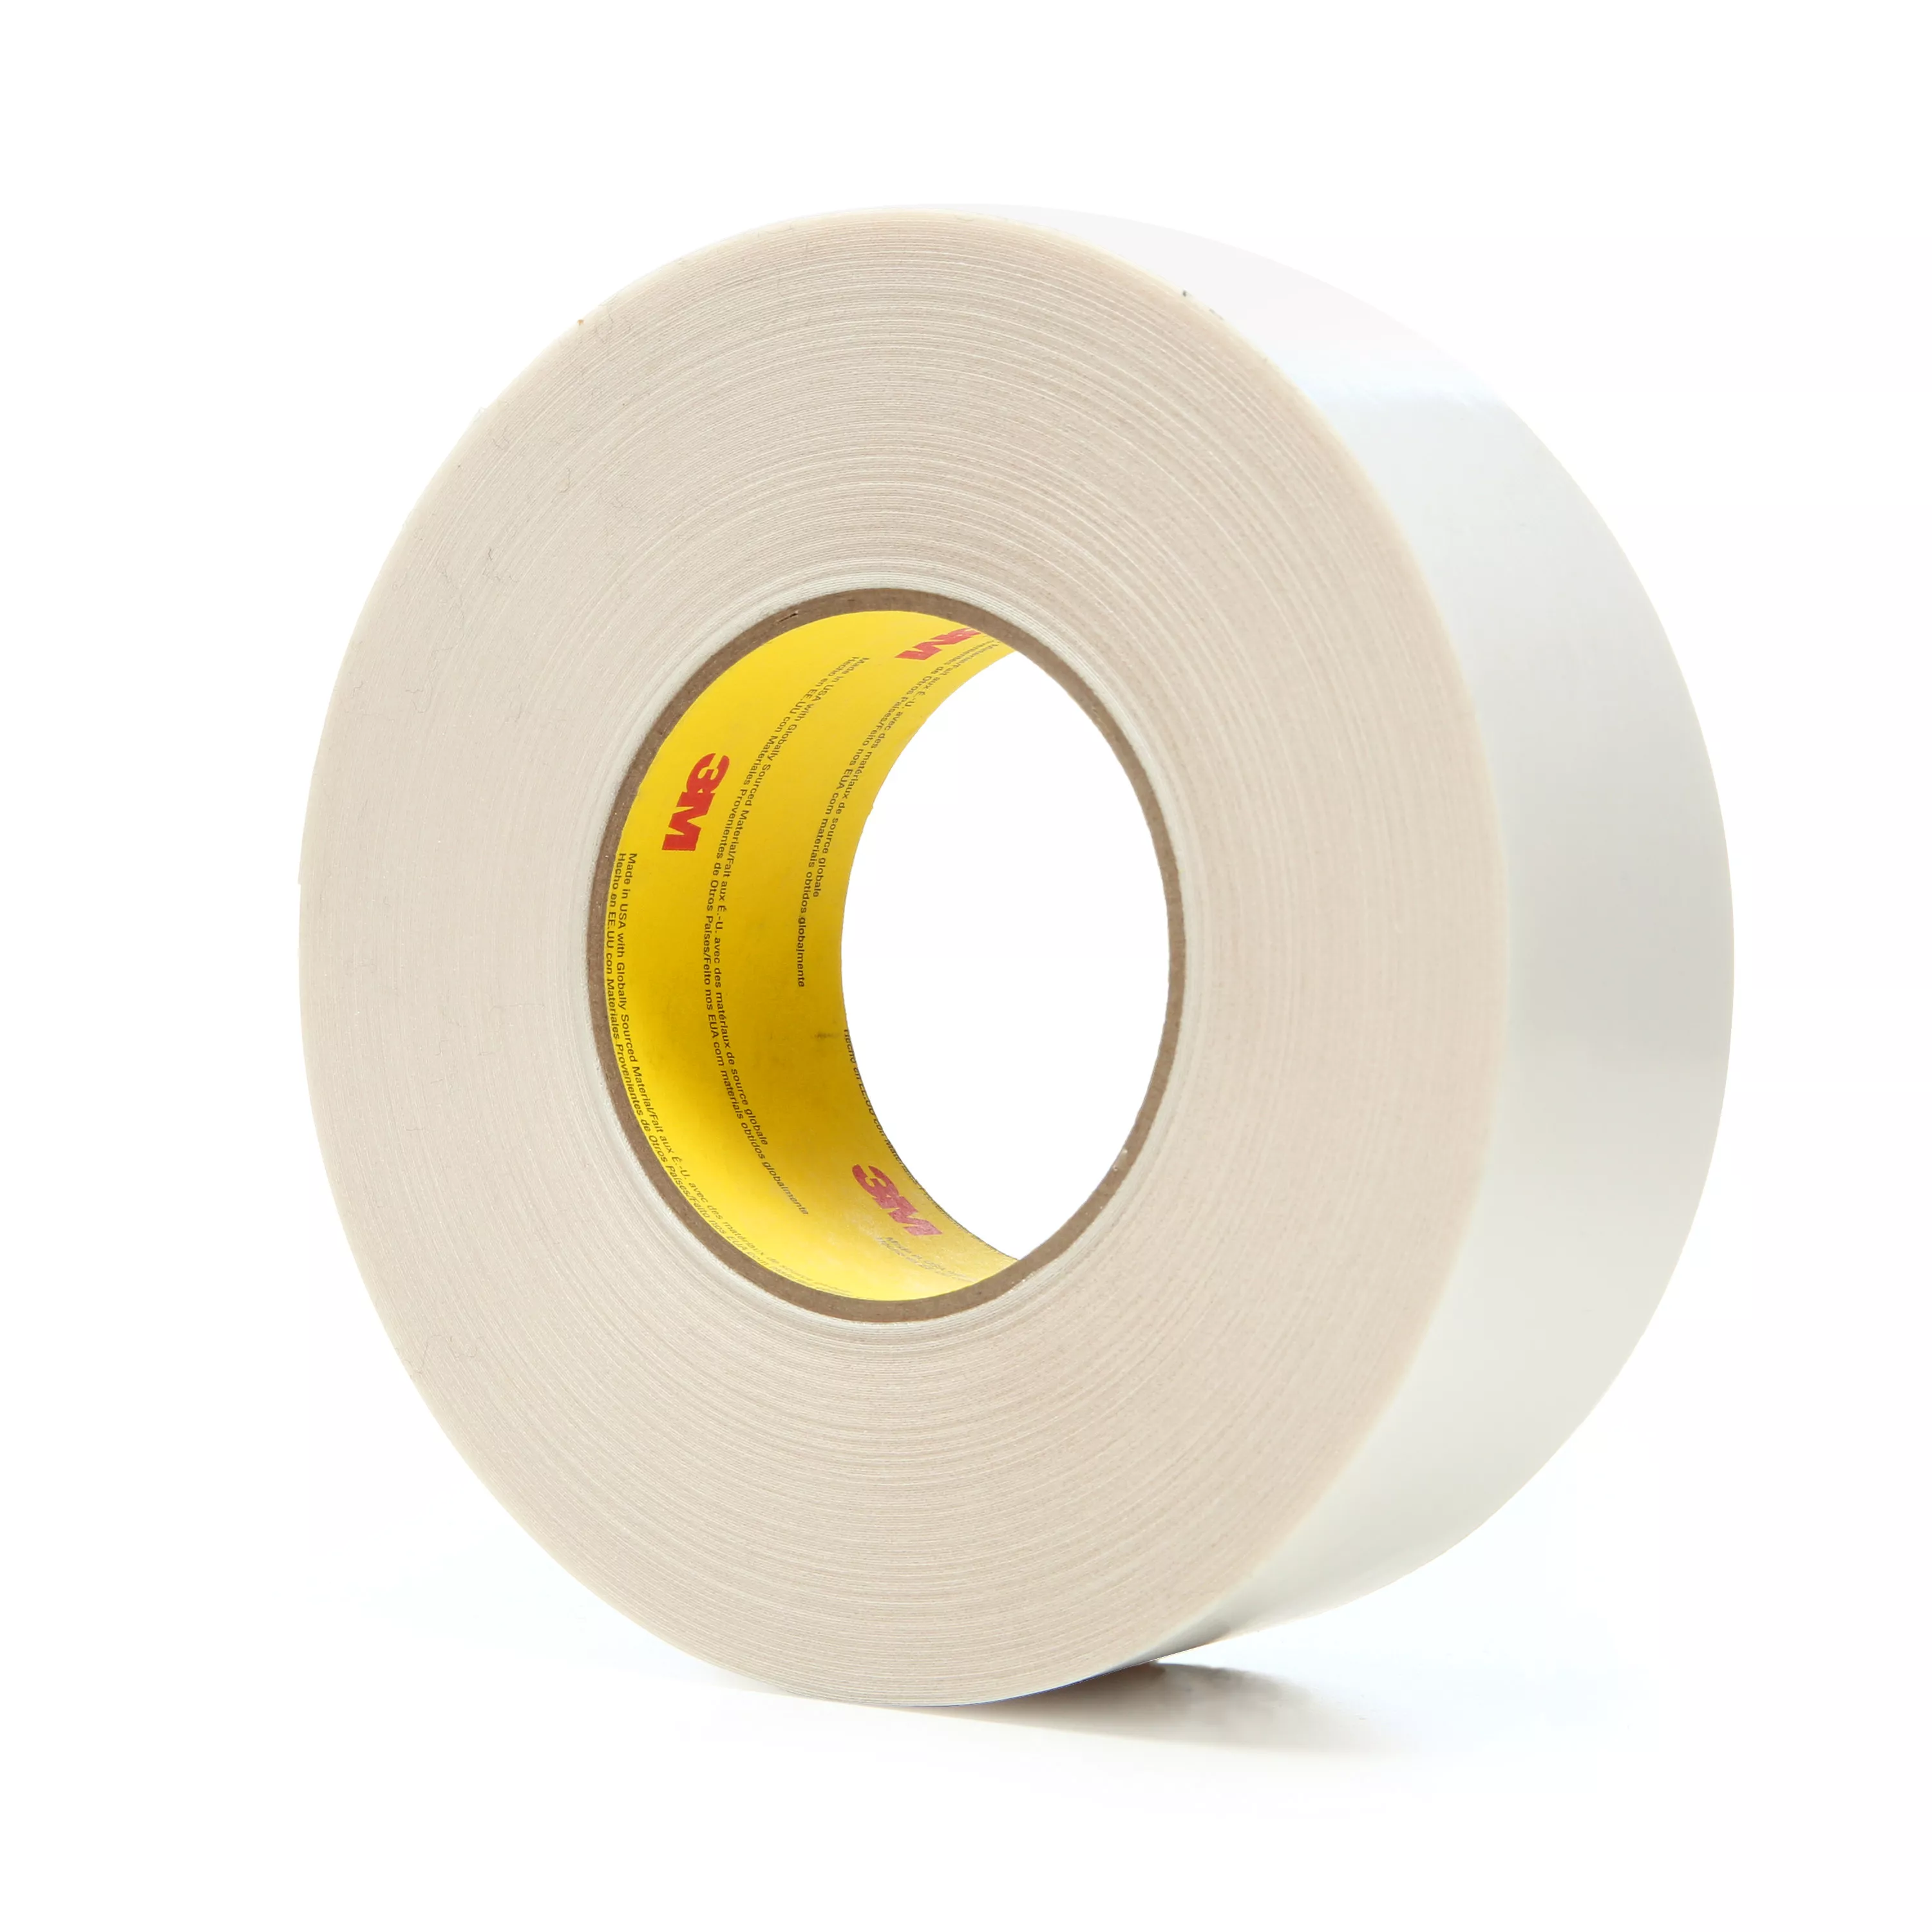 3M™ Double Coated Tape 9741, Clear, 48 mm x 55 m, 6.5 mil, 24 Roll/Case